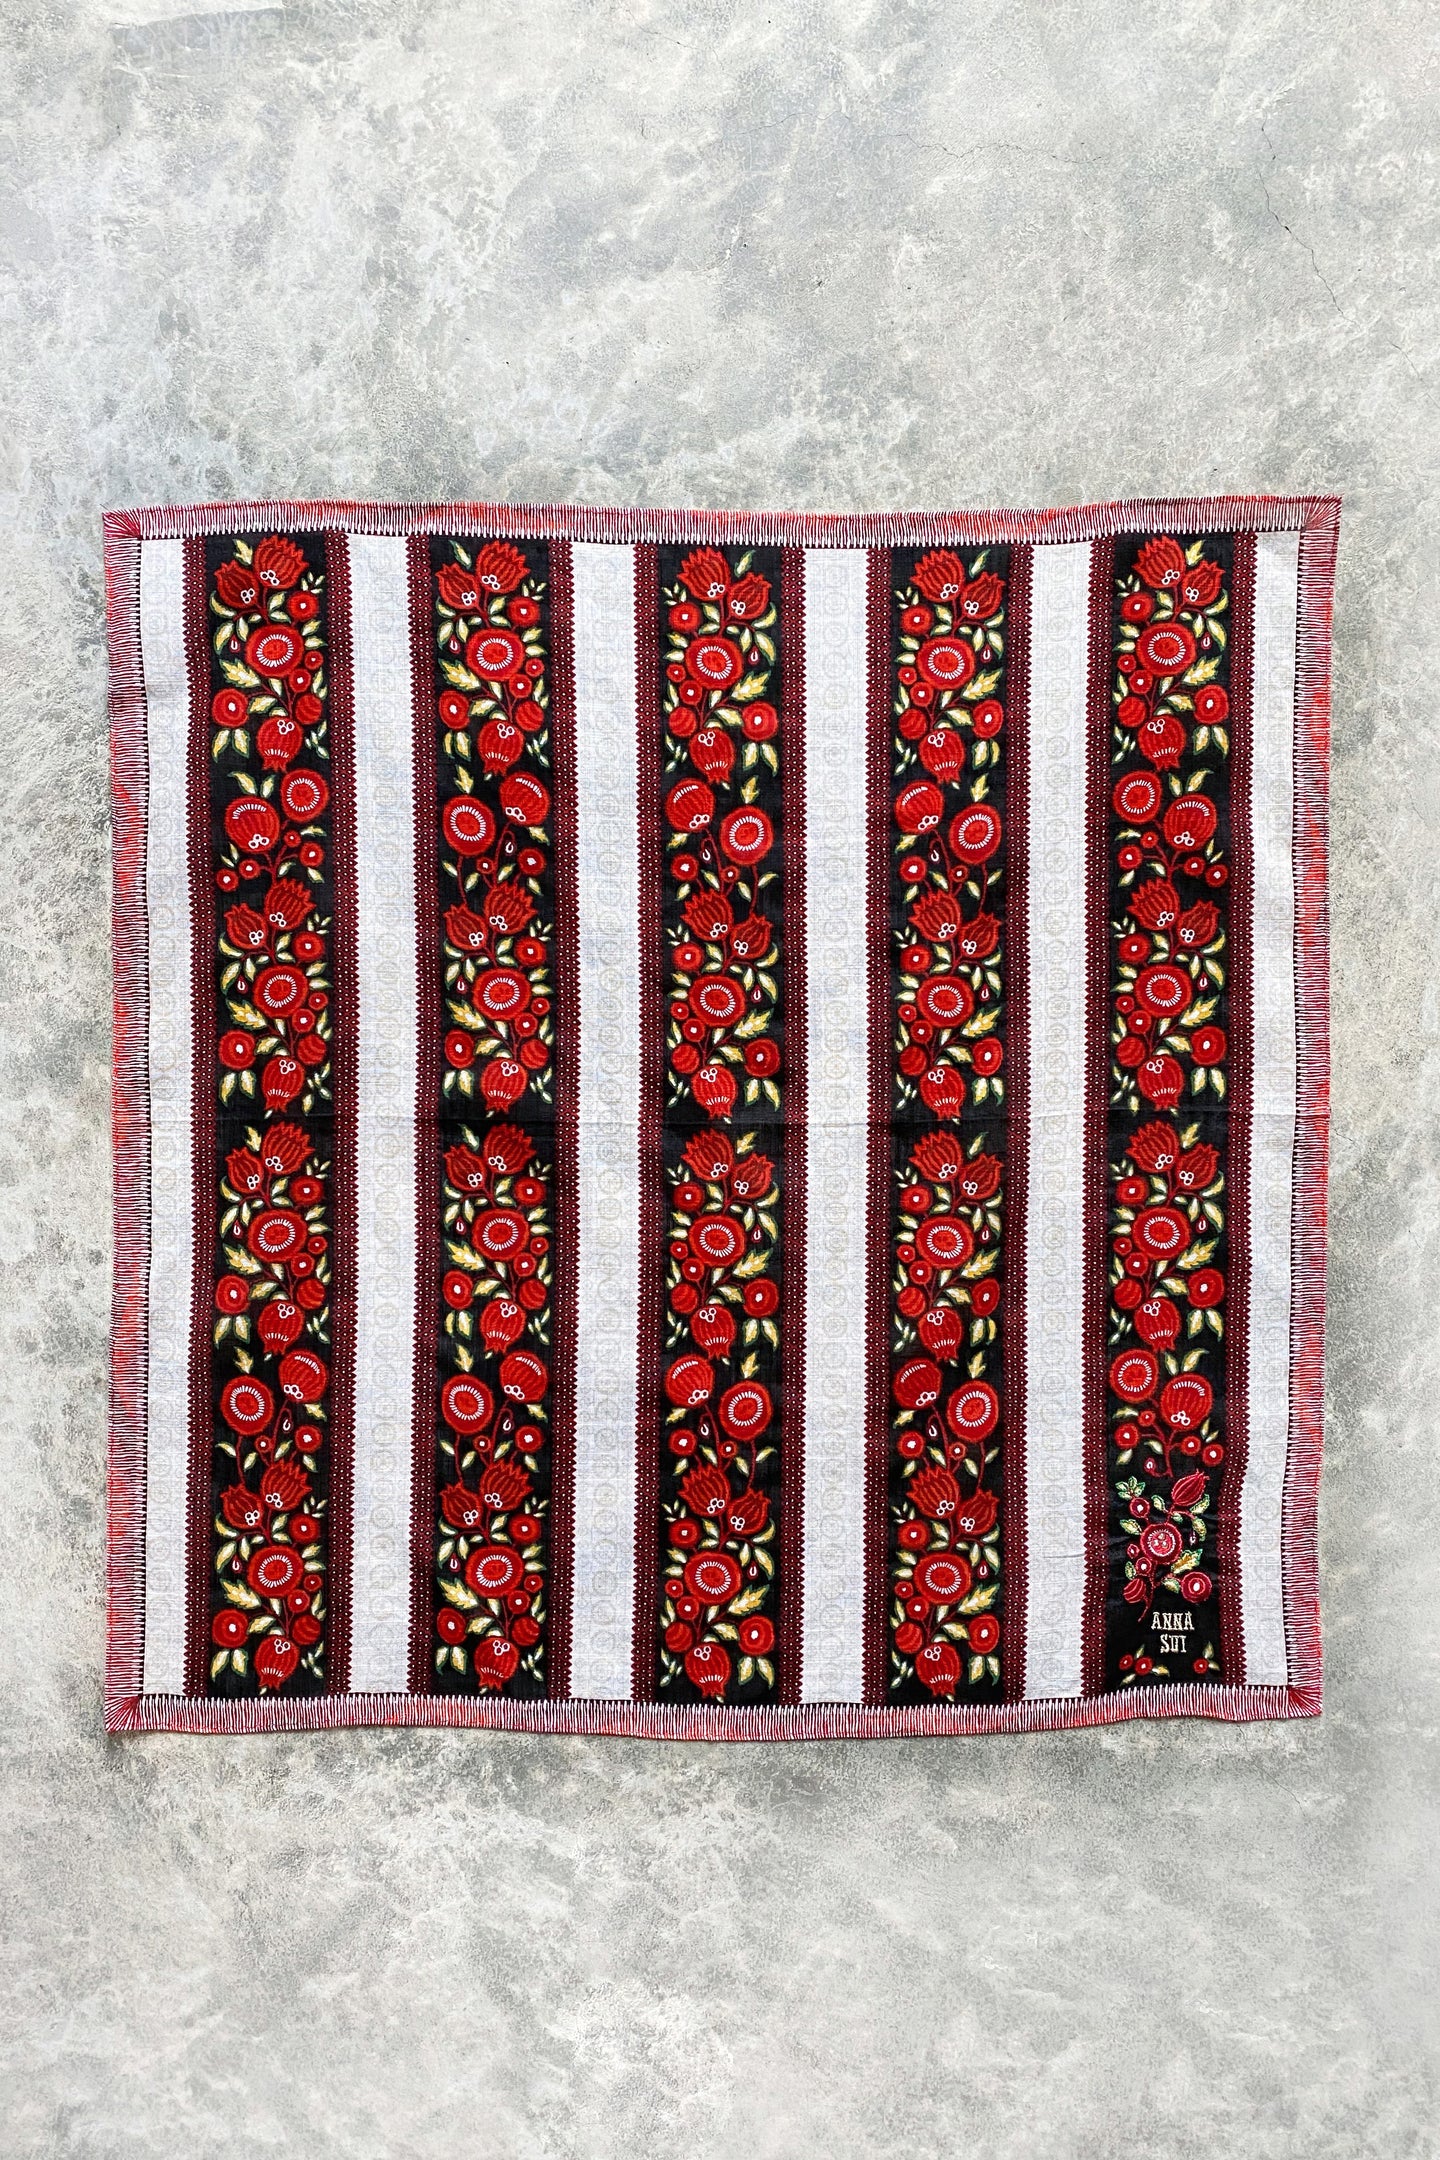 ANNA SUI / RED FLORAL HANDKERCHIEF